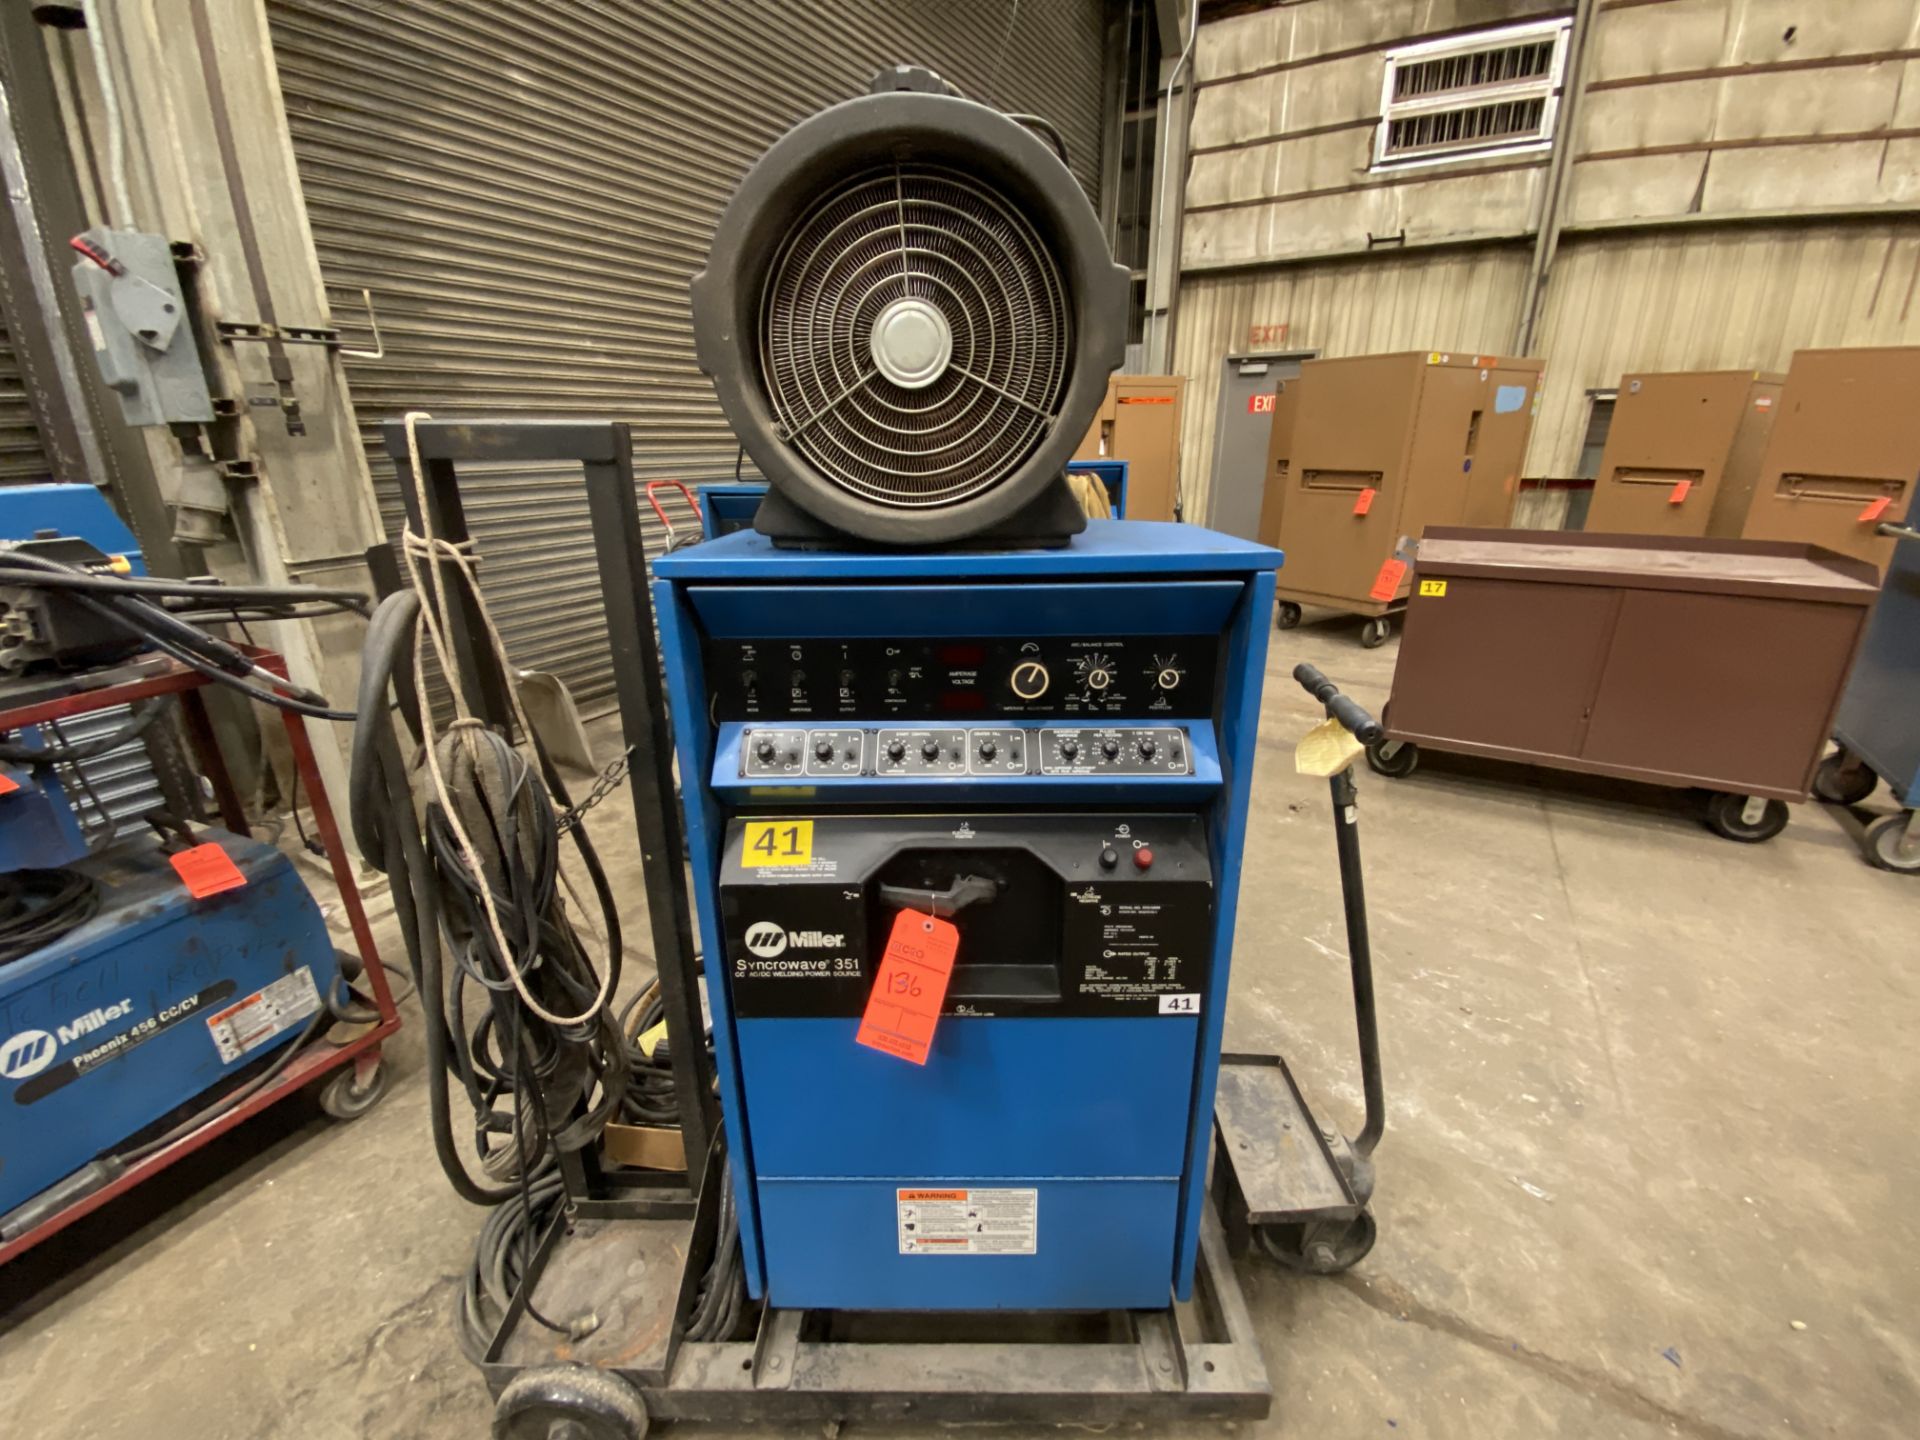 Miller synchrowave 351 CC ac/DC arc welder SN KH316086 with Coolmate 4 water chiller with foot